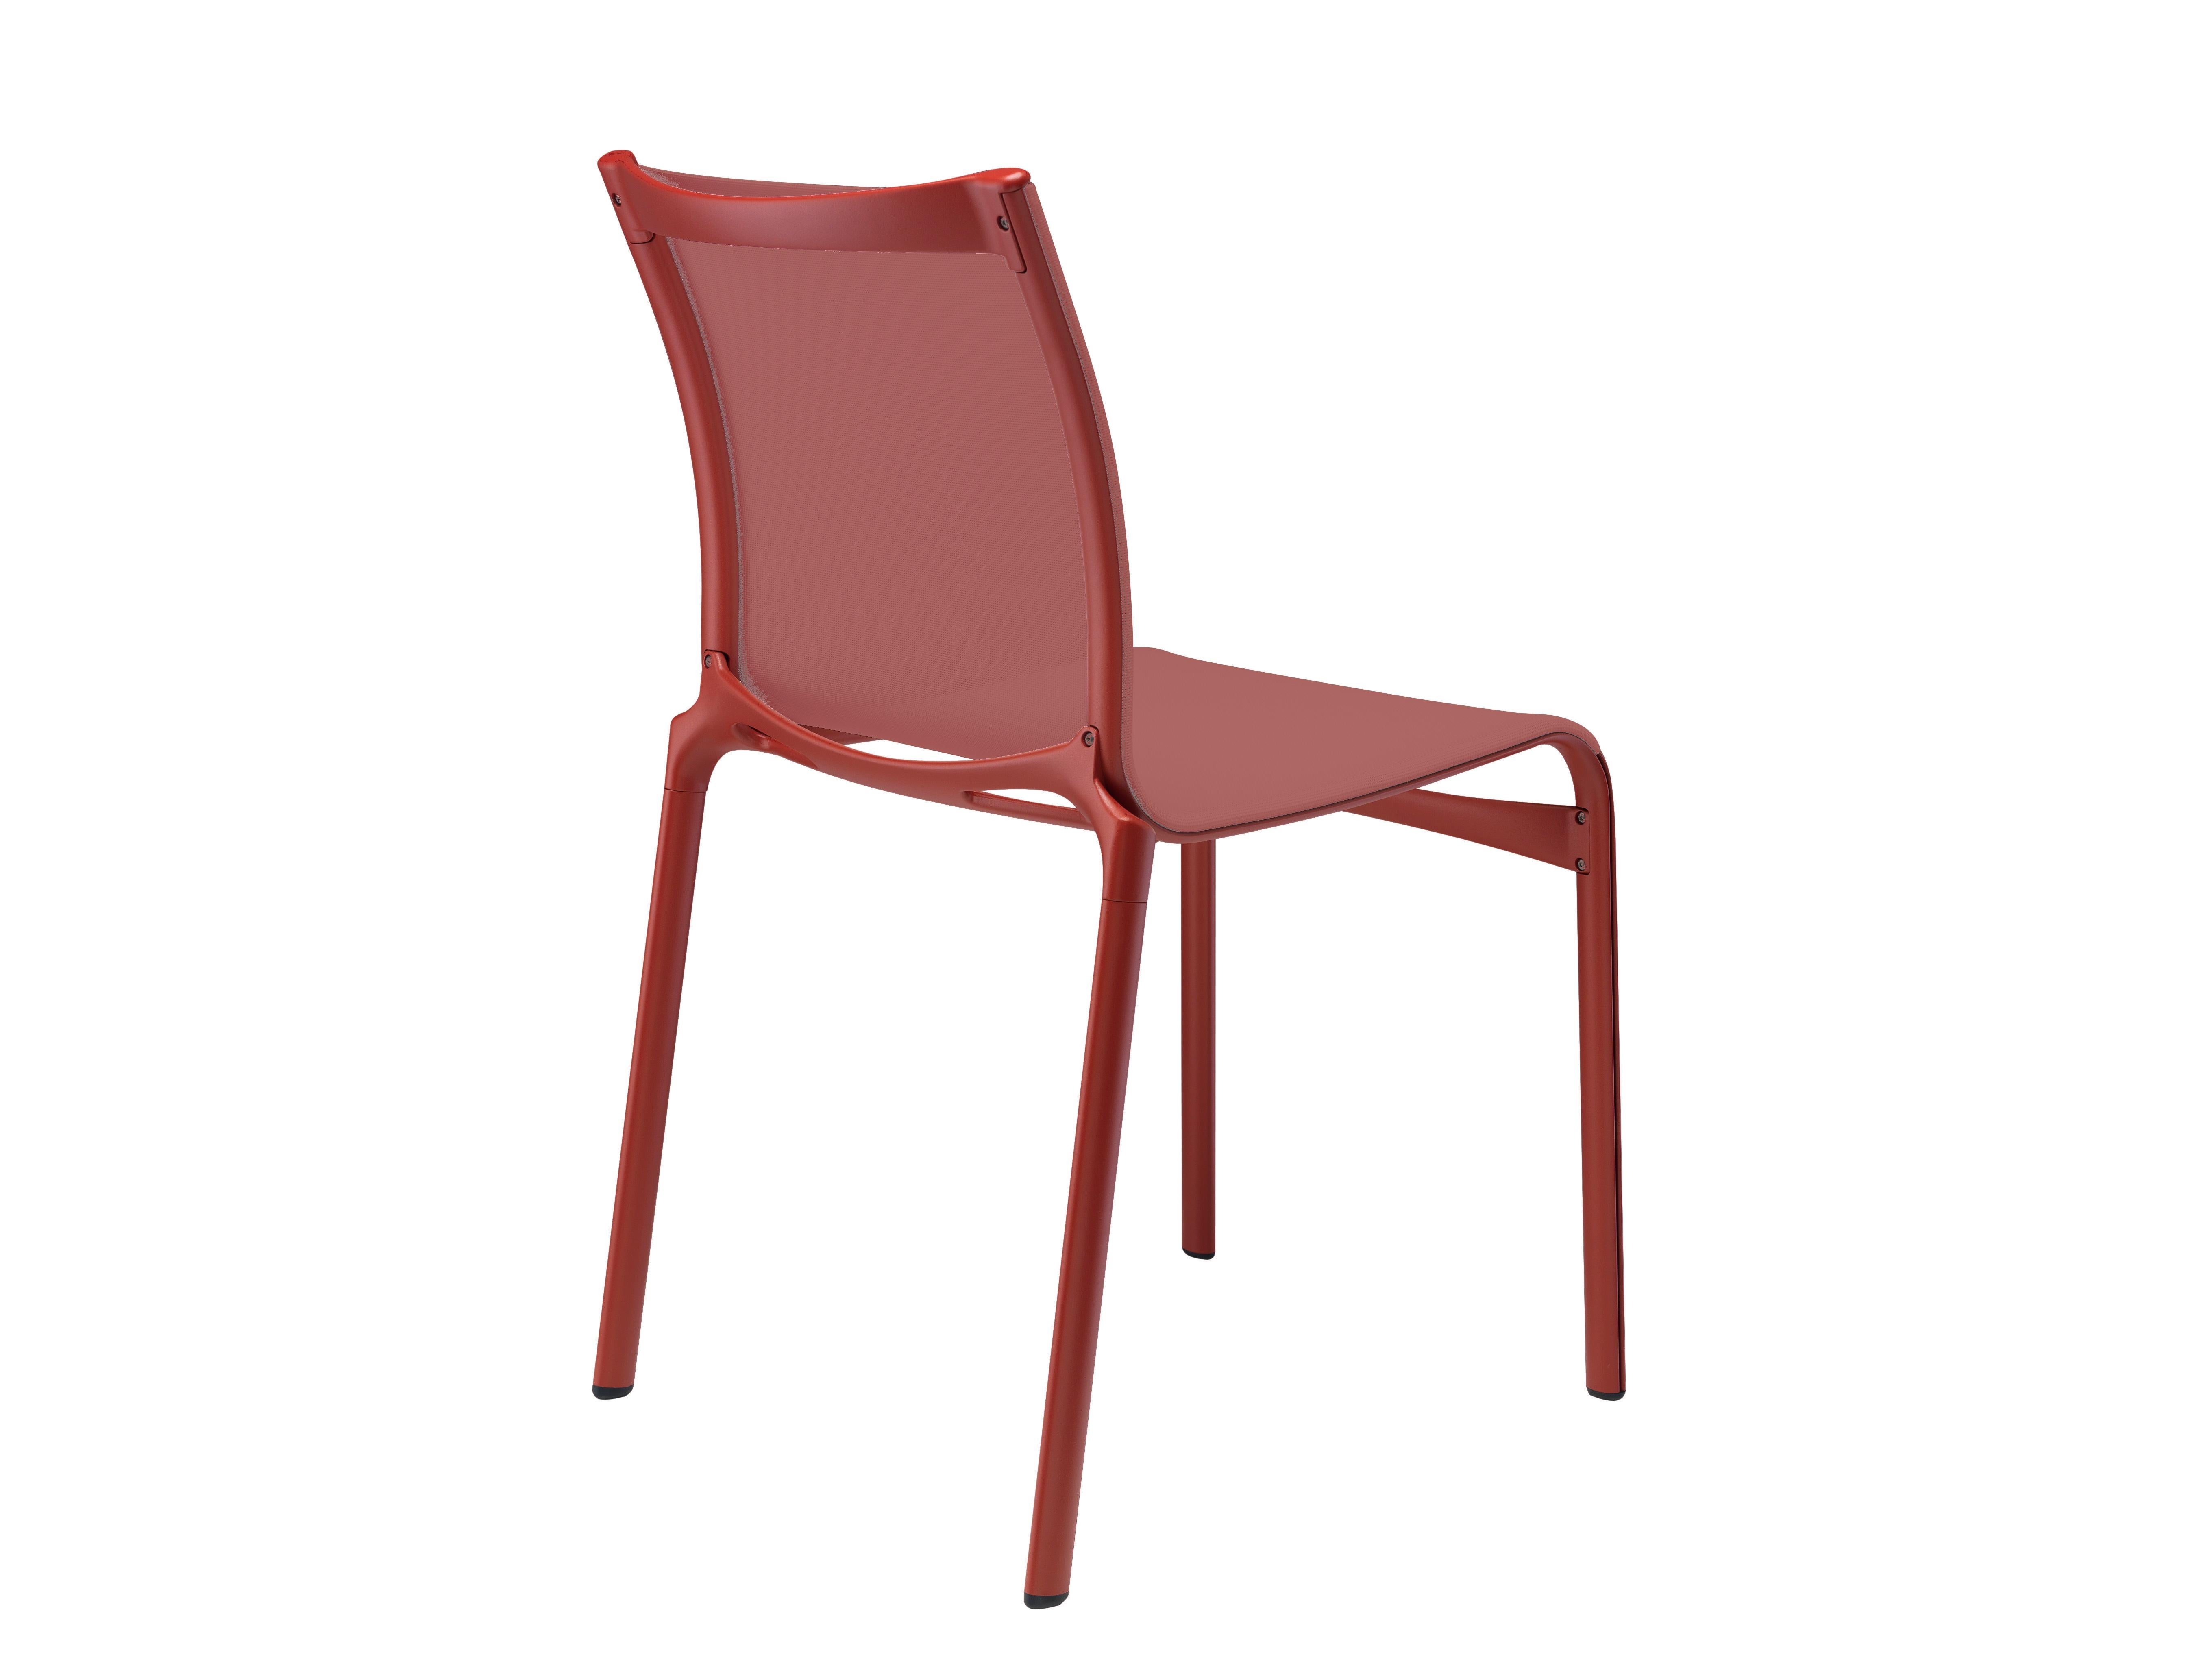 Alias Bigframe 44 Chair in Coral Red Mesh with Lacquered Aluminium Frame by Alberto Meda

Stacking chair with structure made of extruded aluminium profile and die-cast aluminium elements. Seat and back in fire retardant PVC covered polyester mesh,